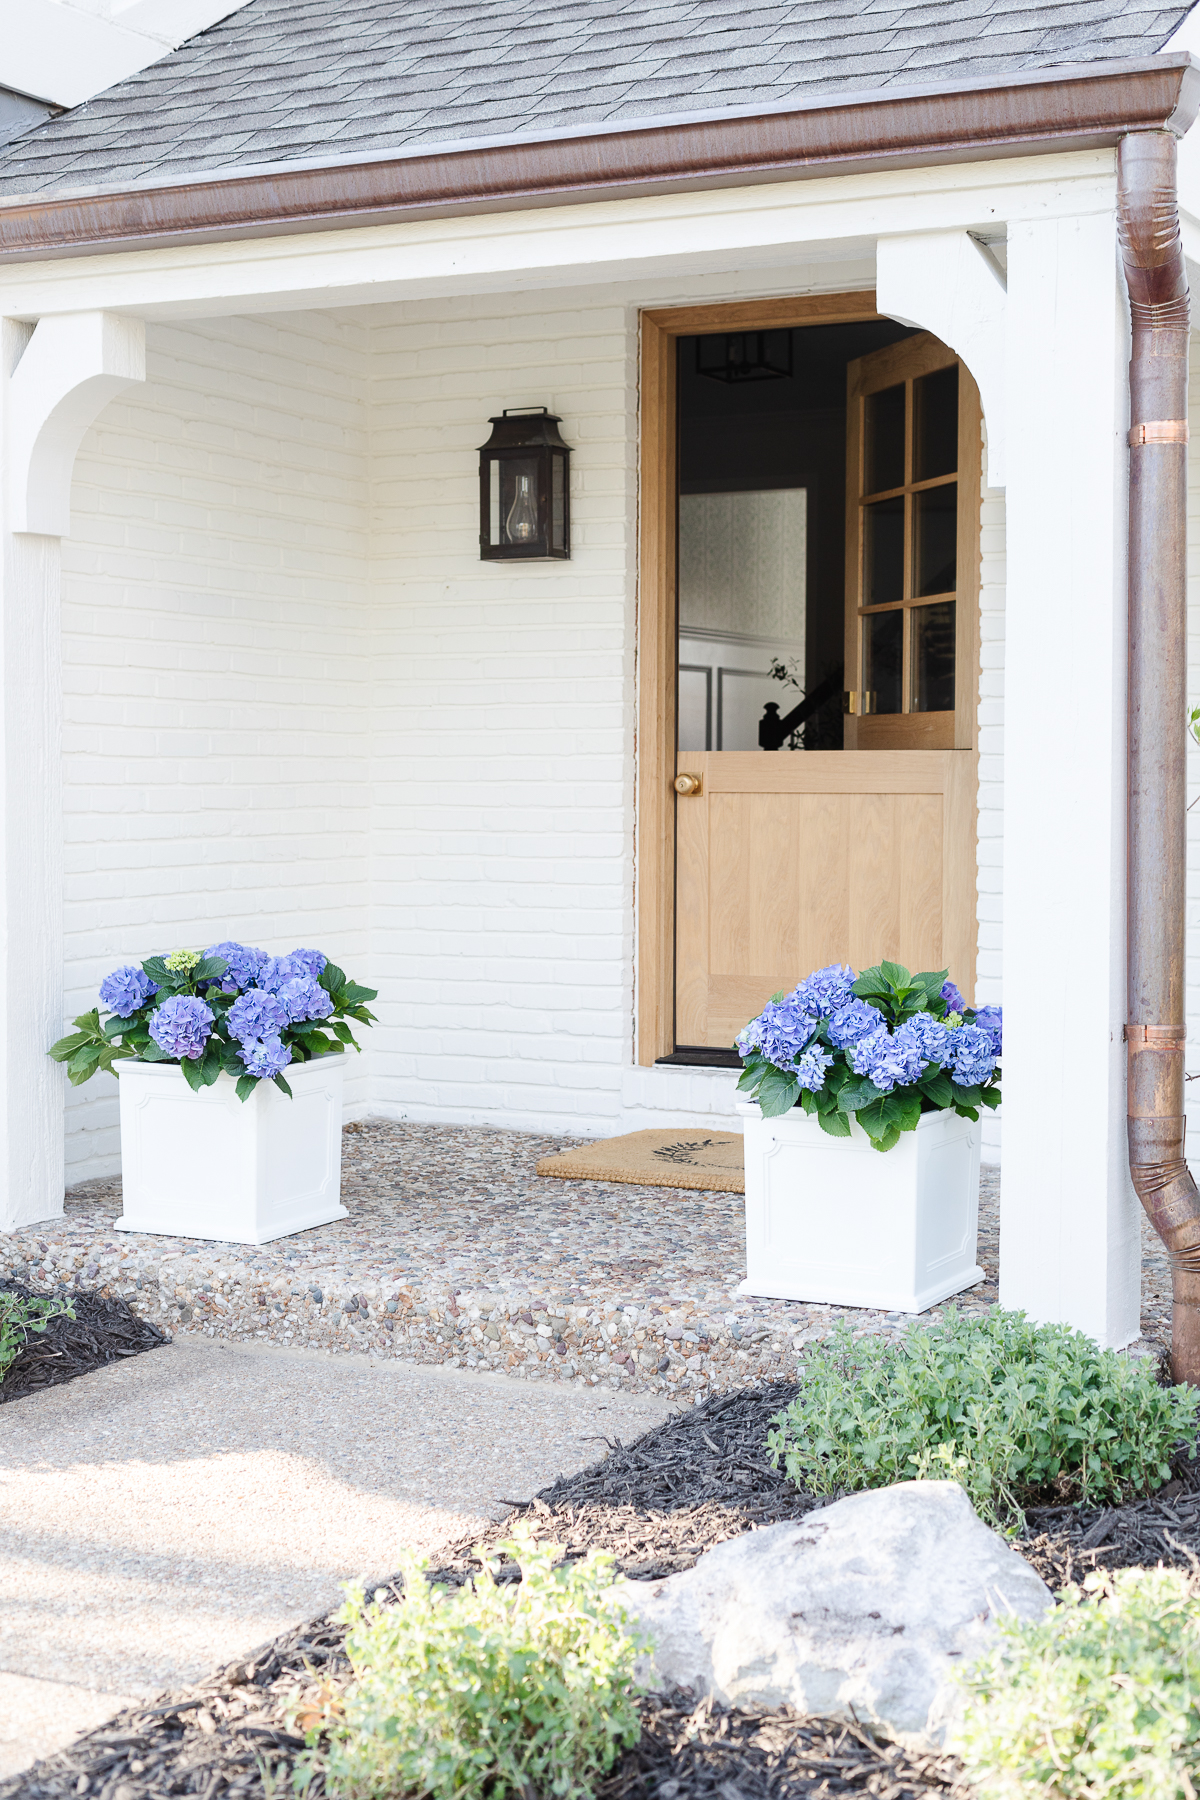 A white brick house with a wooden Dutch door and white planters on the spring porch, filled with blue hydrangeas.